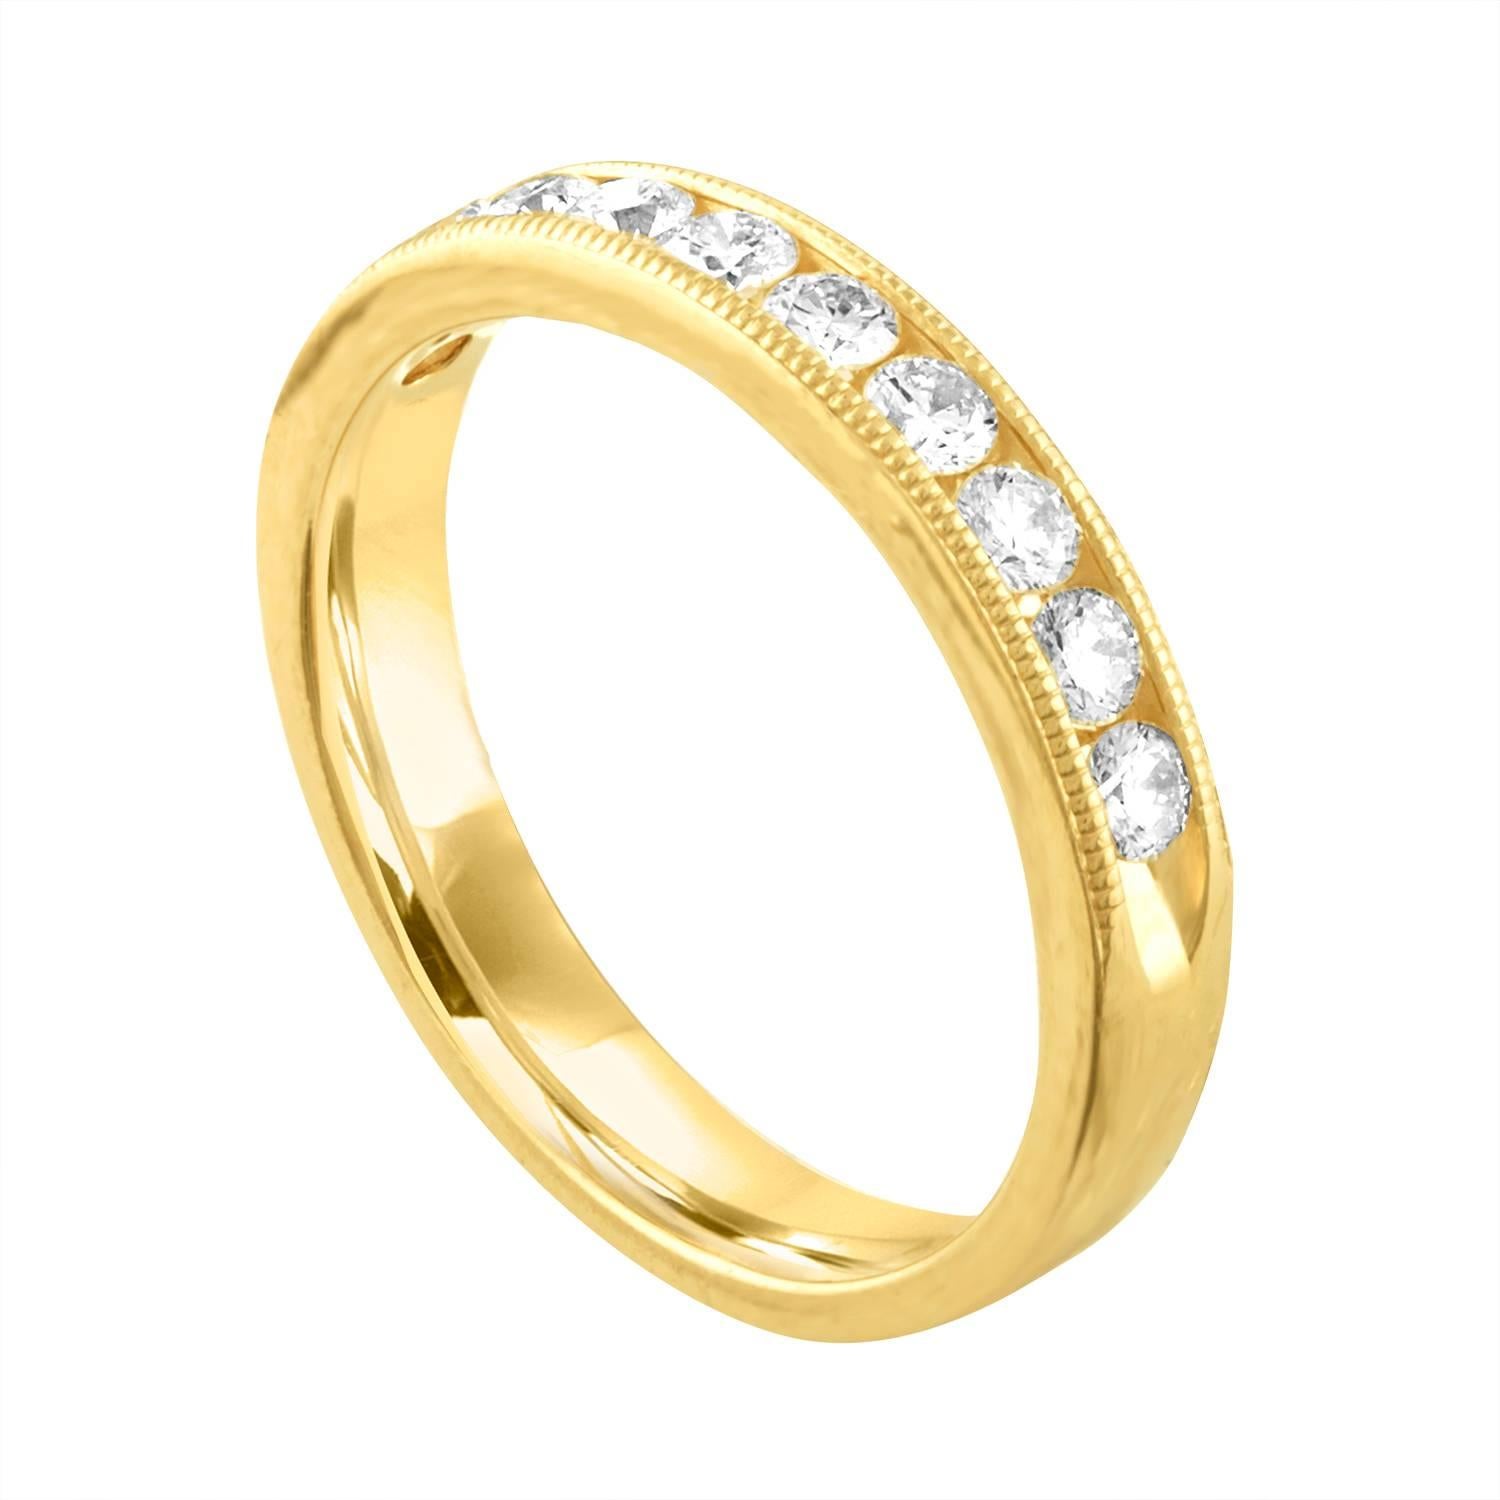 Channel Set Milgrain Half Band Ring
The ring is 14K Yellow Gold.
There are 0.50 Carats In Diamonds F SI
The ring is a size 5.75, sizable.
The ring is 3.25mm wide.
The ring weighs 2.5 grams